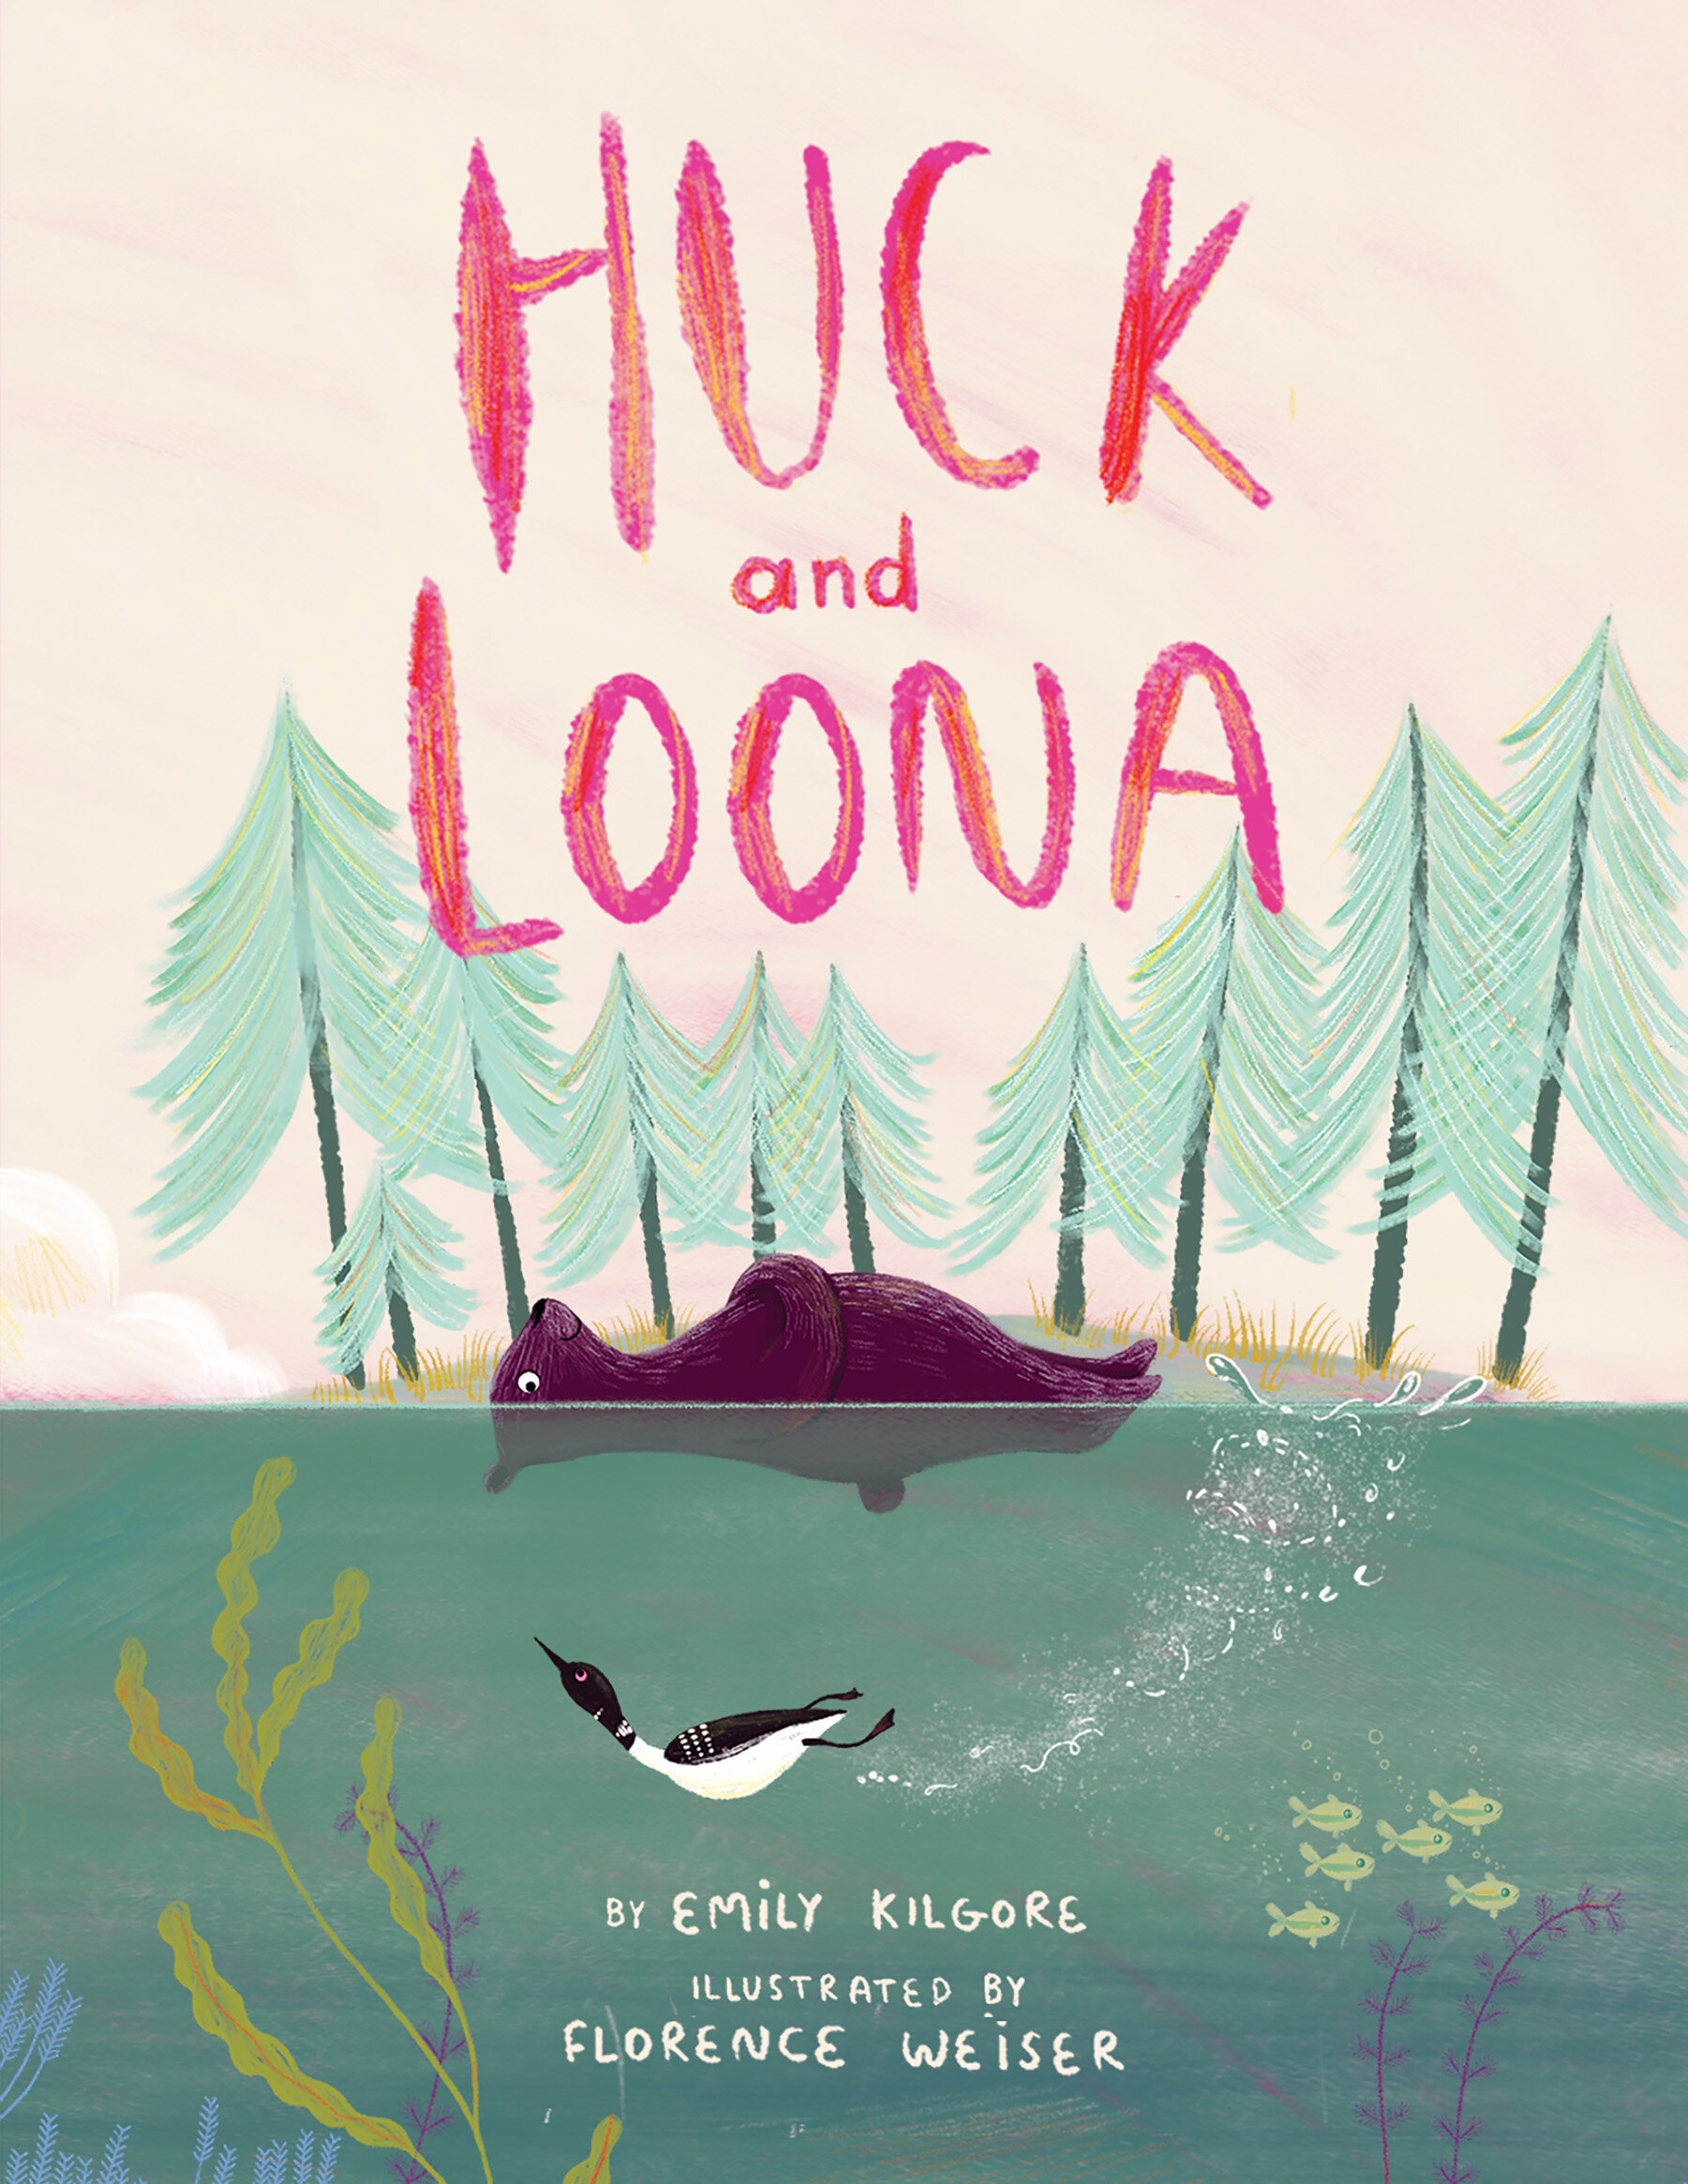 Huck and Loona